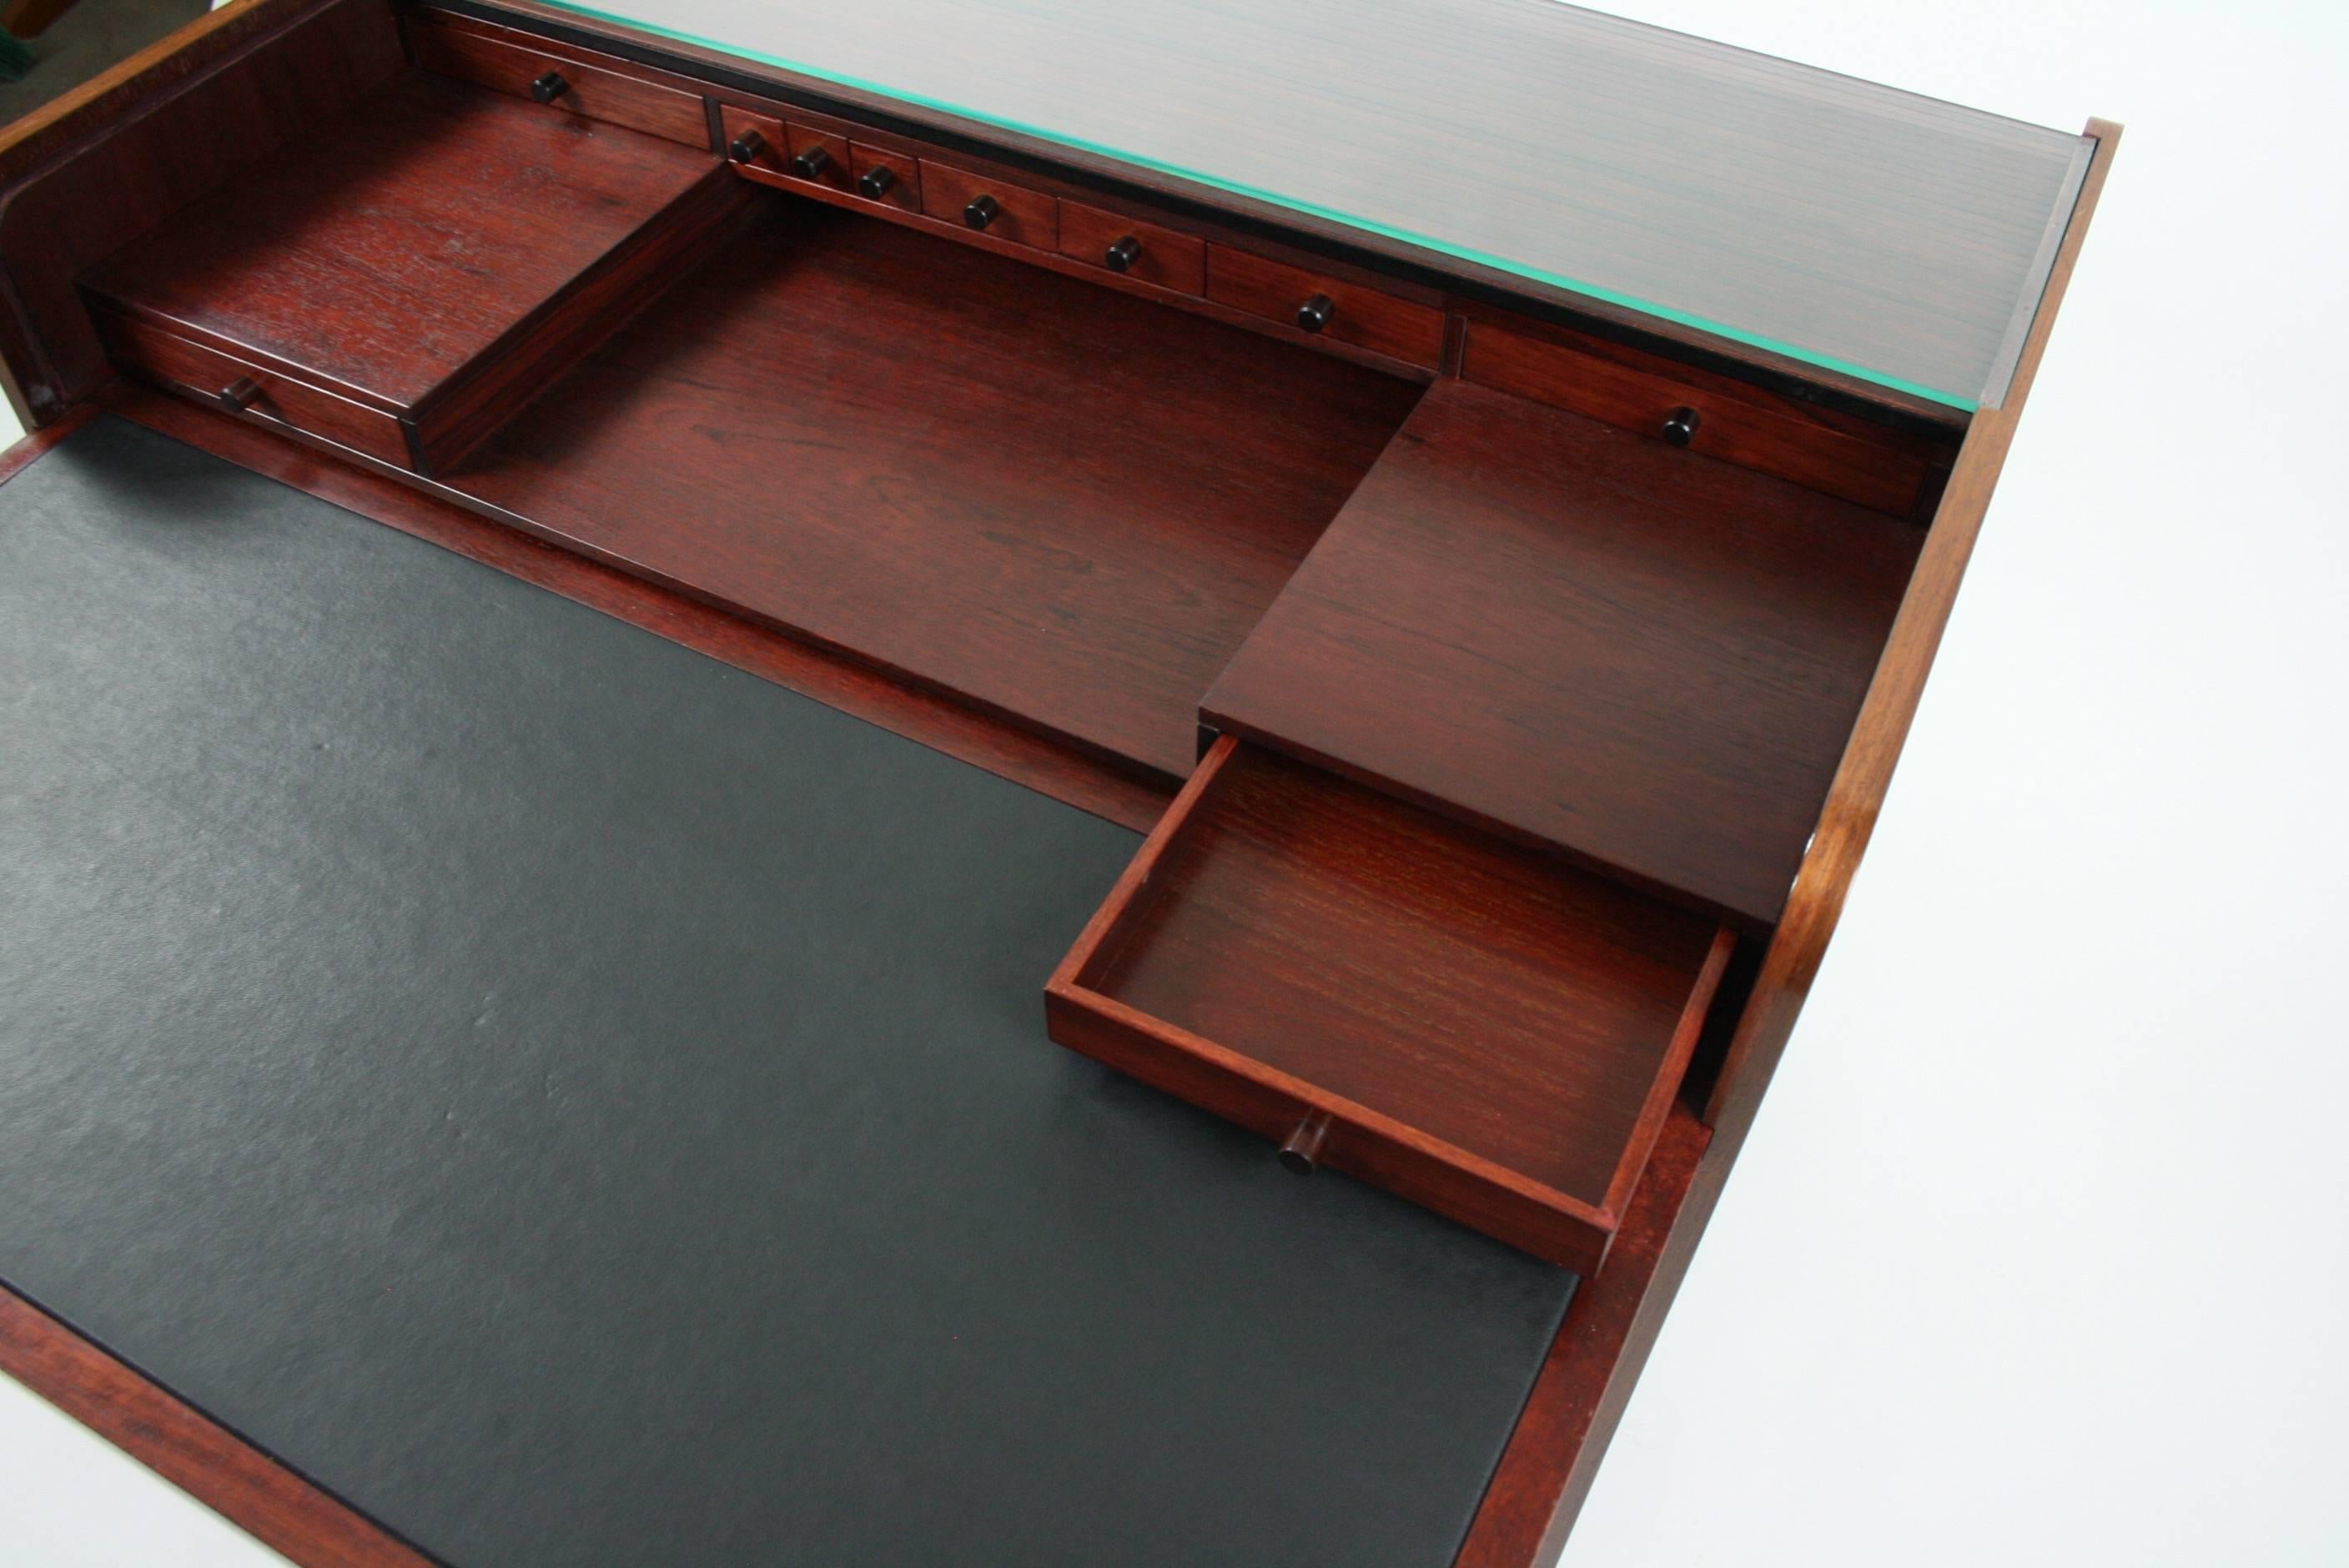 Mid-Century Modern Gianfranco Frattini Desk with Roll Top in Rosewood, circa 1962 for Bernini Italy